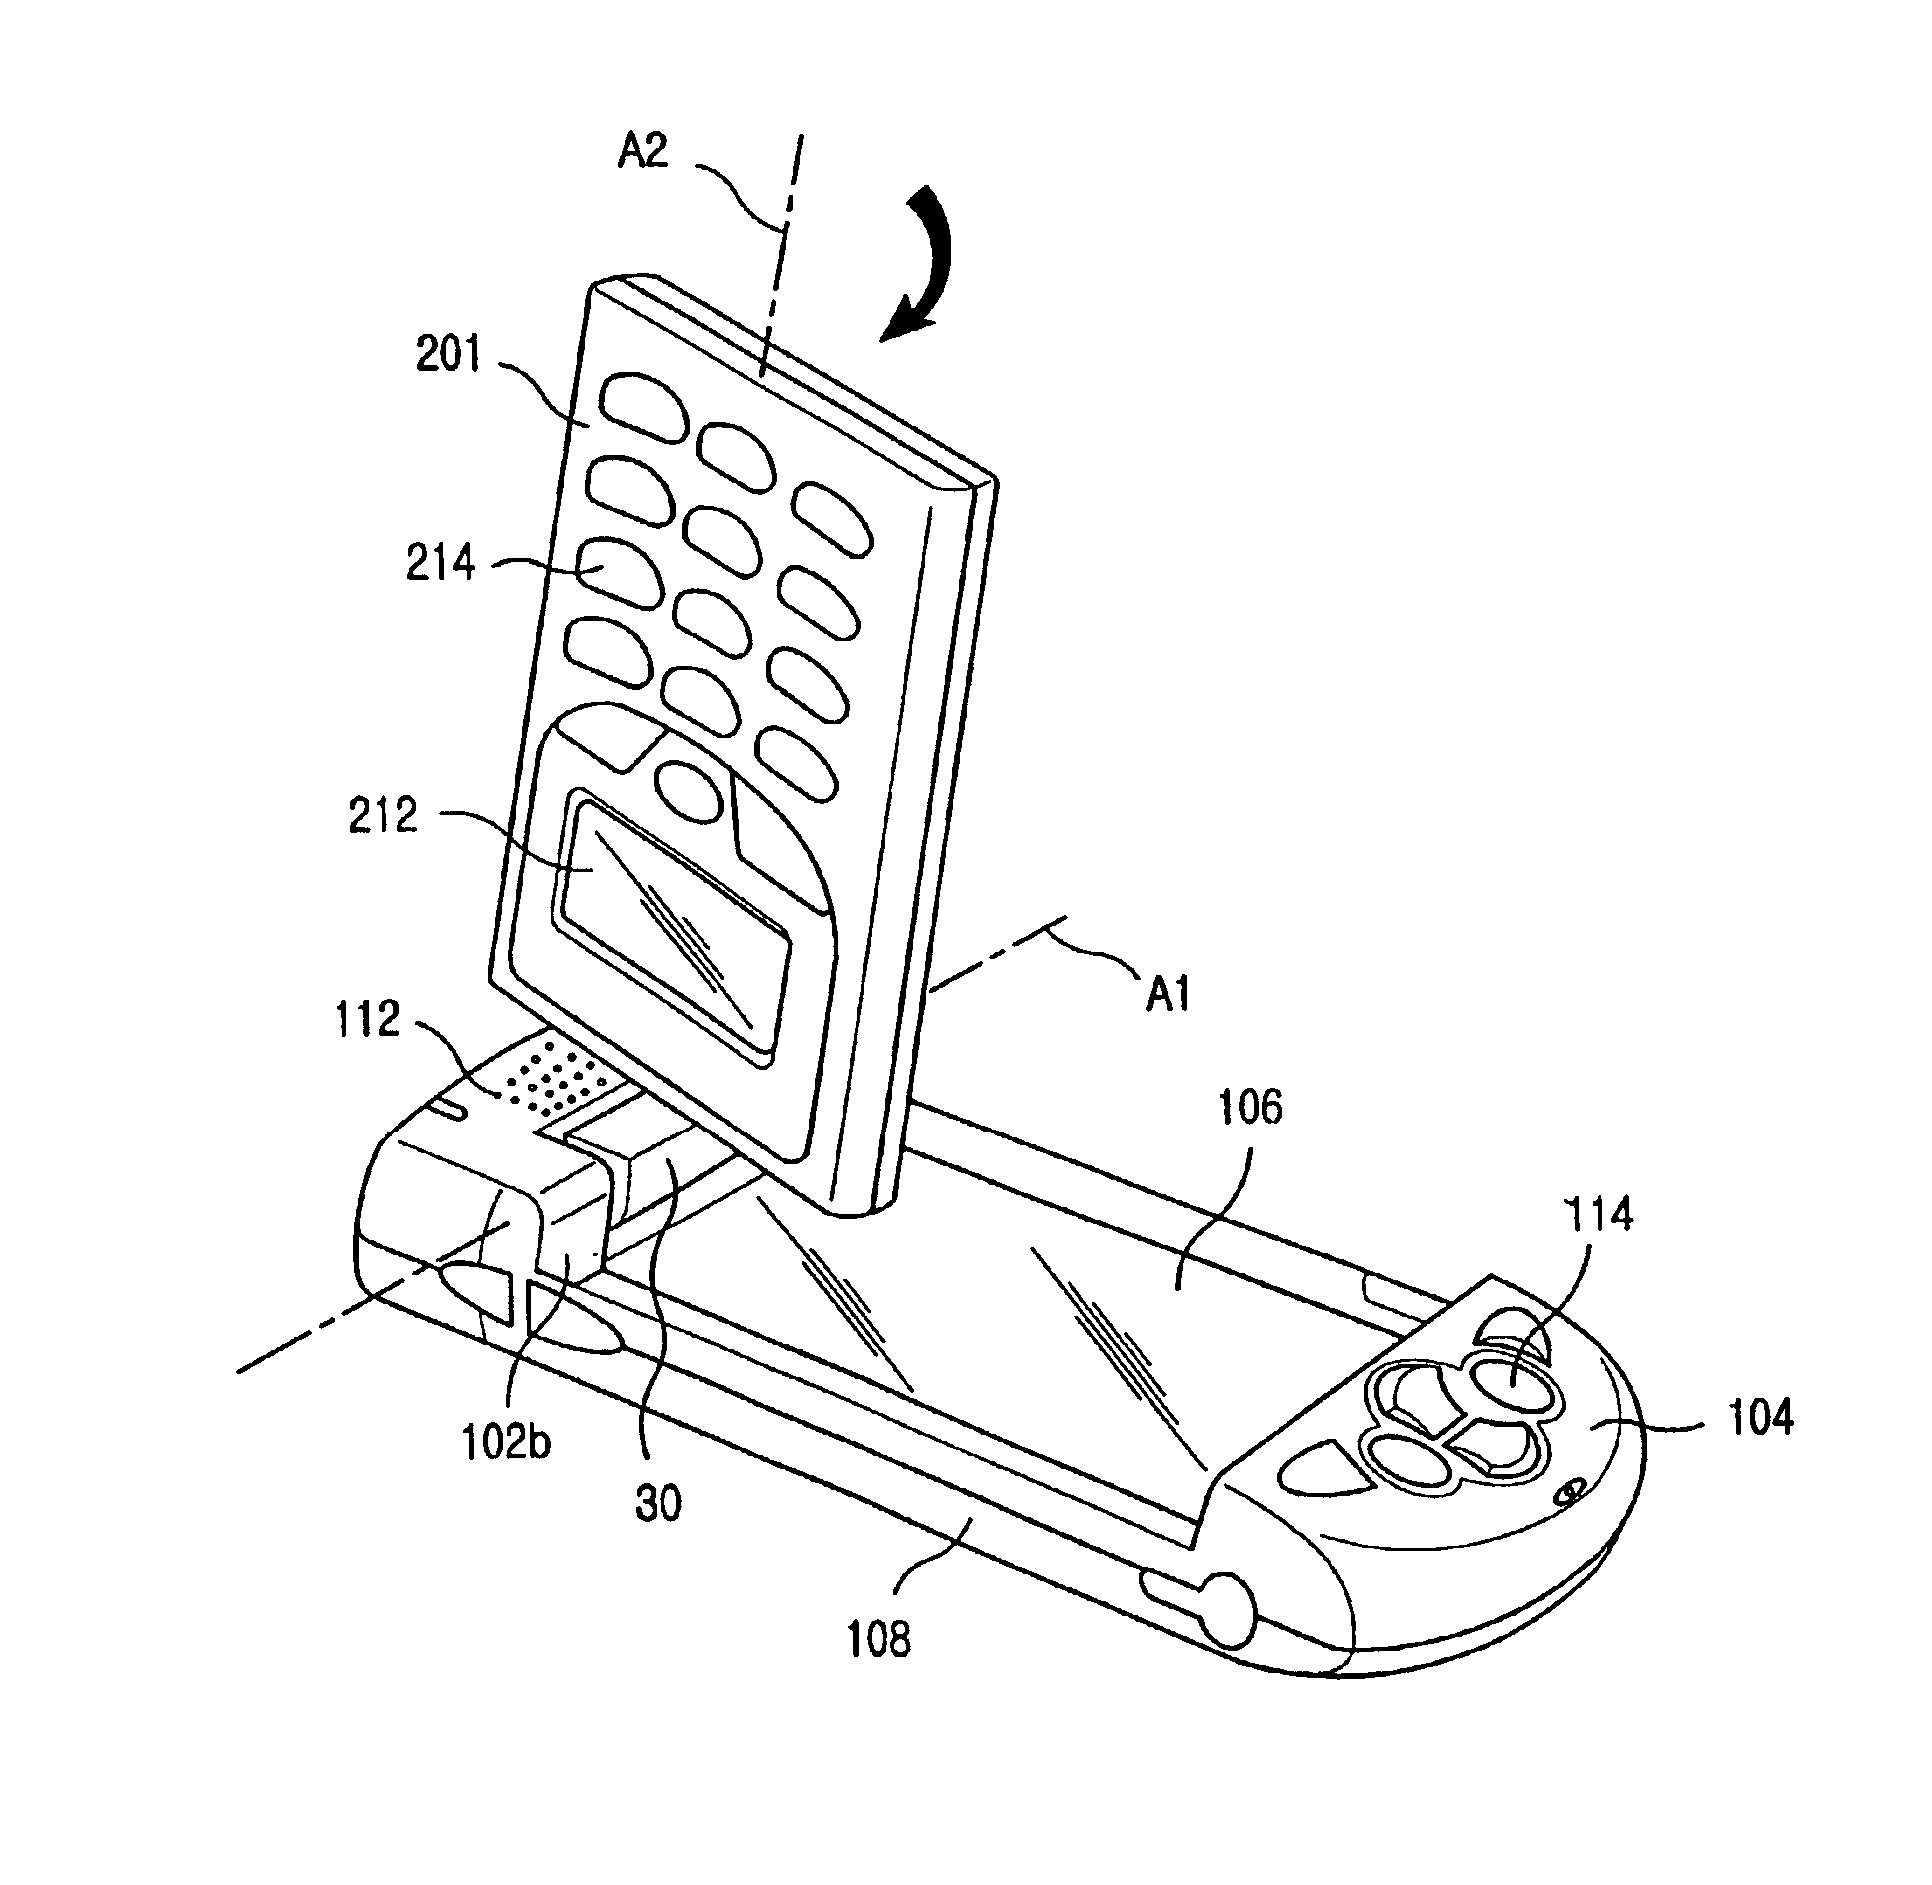 Portable communication apparatus with digital camera and personal digital assistant